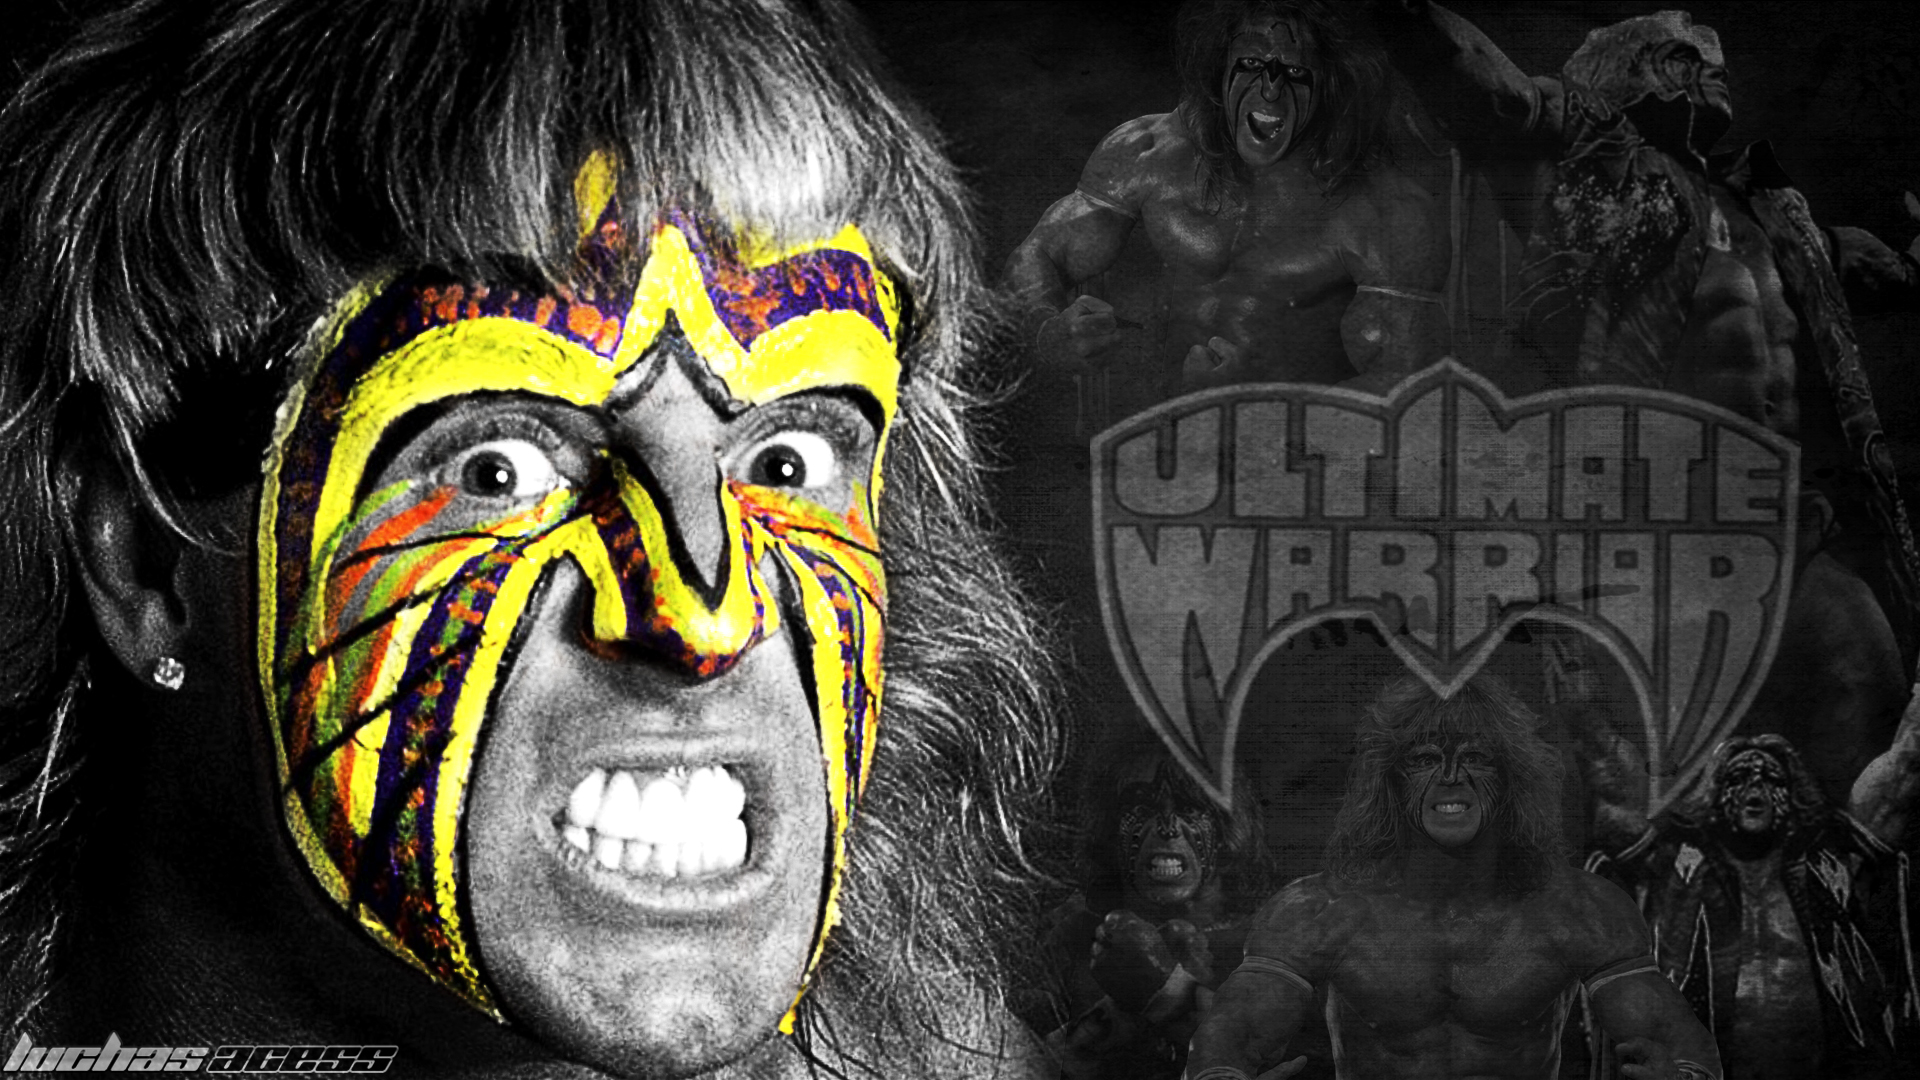 Wallpaper Ultimate Warrior 2014 luchas acess